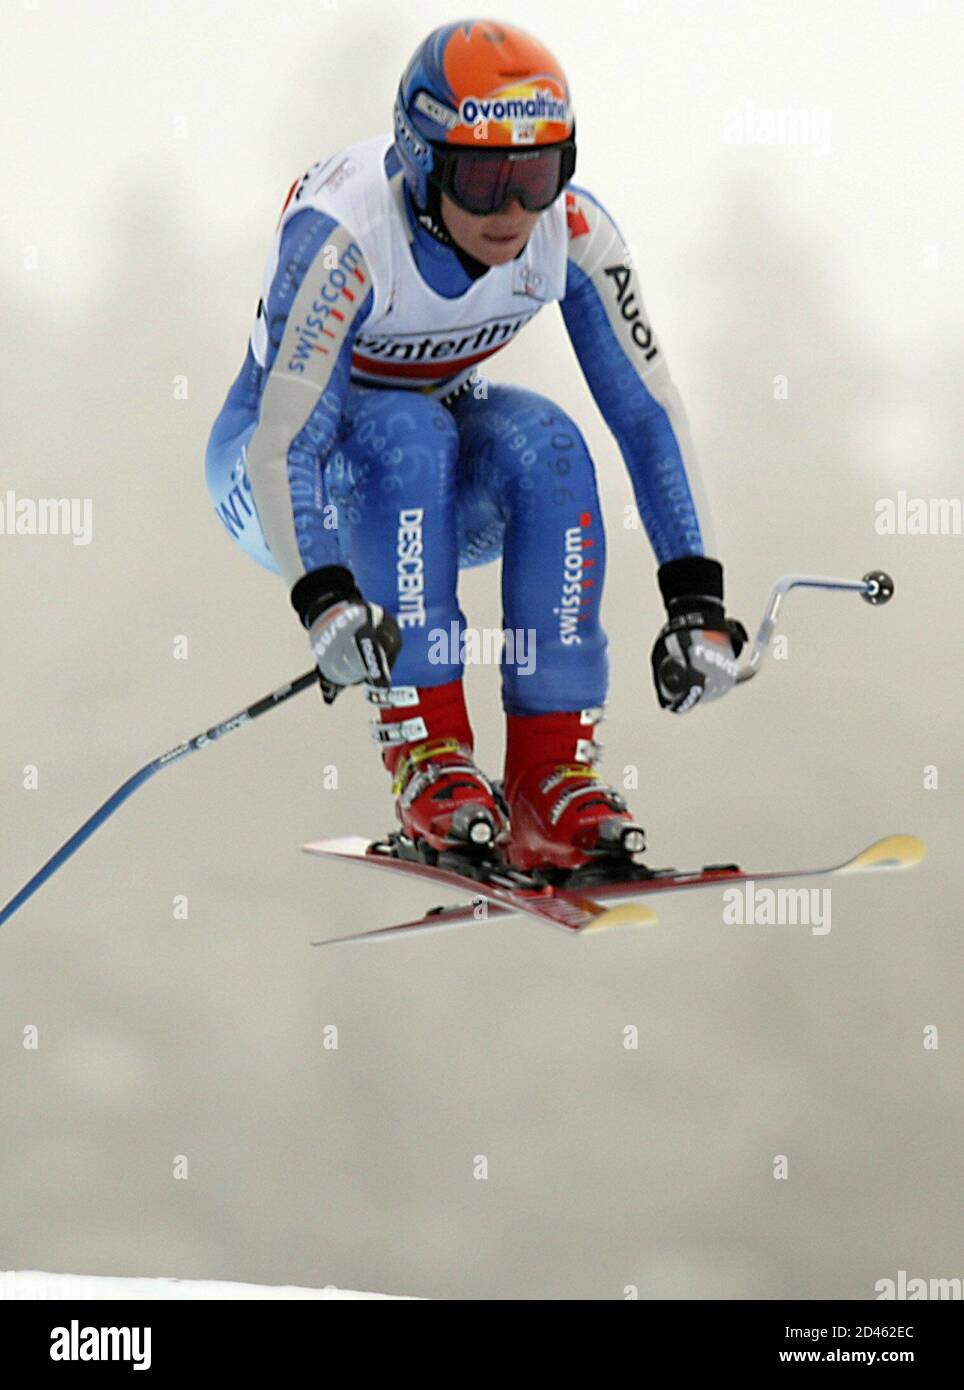 Switzerland's Sylvaine Berthod takes air while on her way to an 11th place finish at the women's World Cup Super-G race in Lake Louise December 8, 2002. Italy's Karen Putzer won with a time of one minute 10.68 seconds. REUTERS/Mike Blake  MB/ME Stock Photo